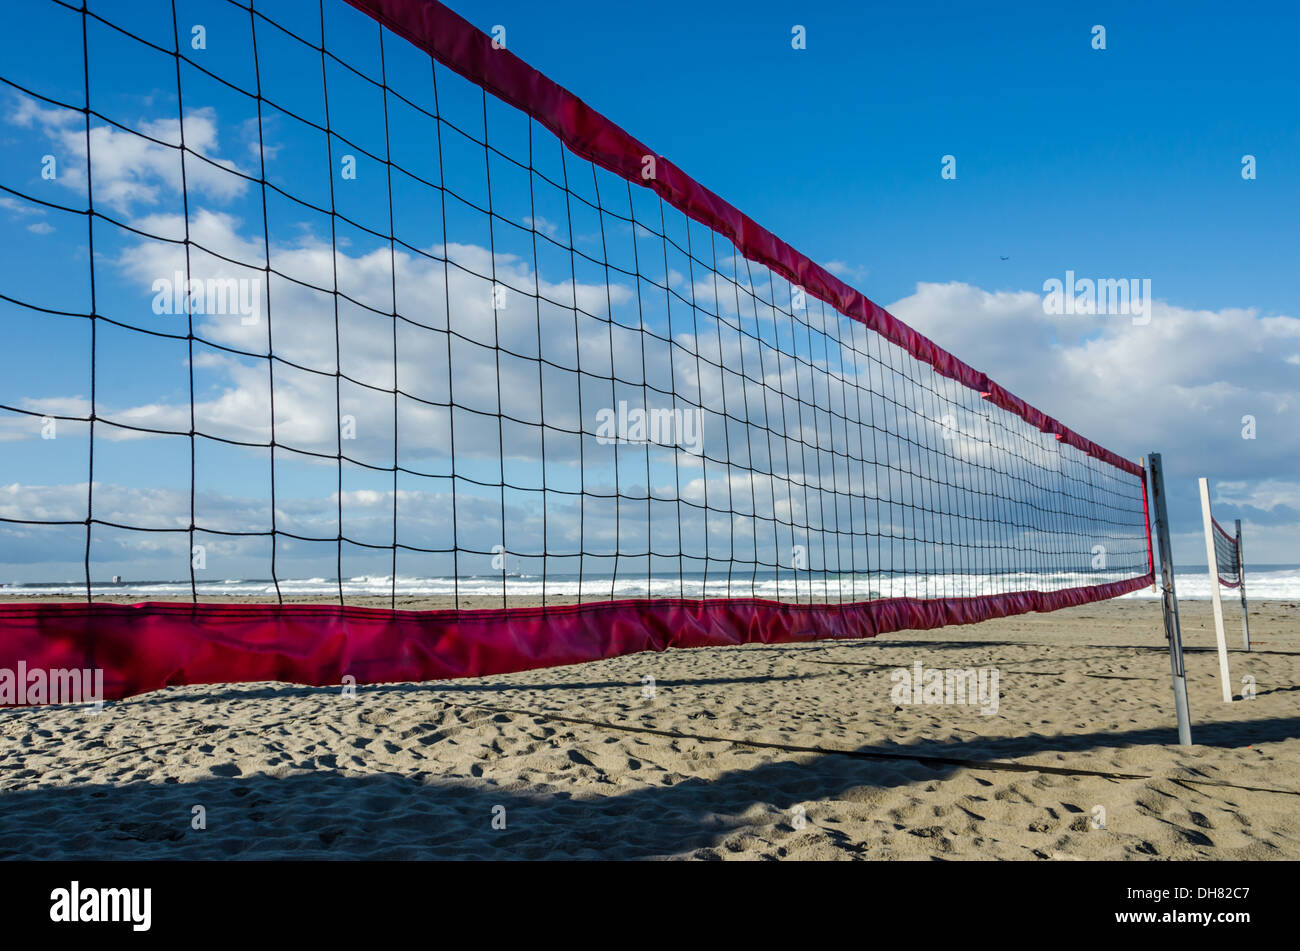 Net images hi-res stock photography and images - Alamy